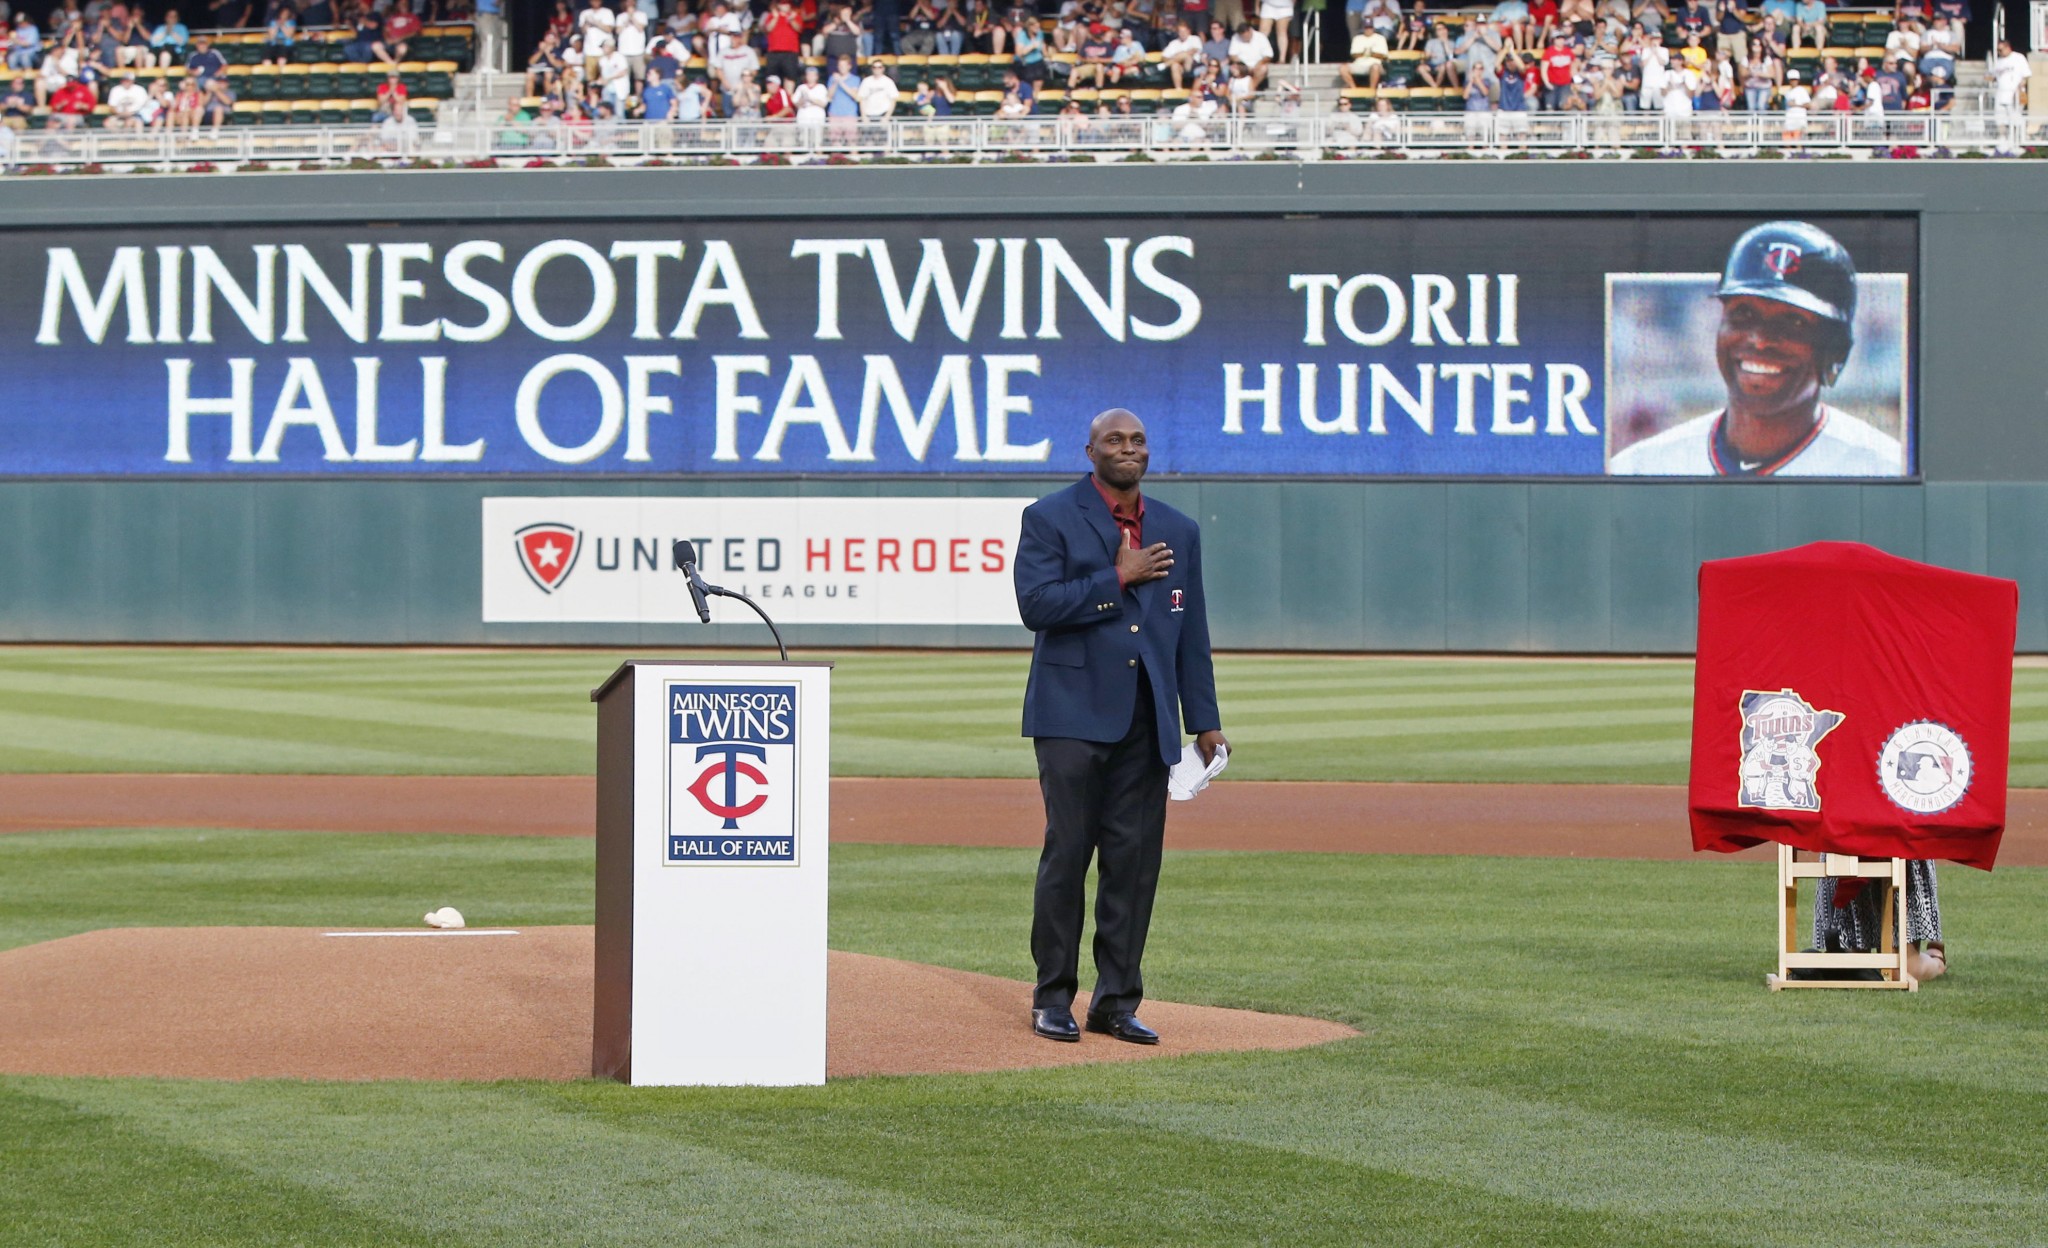 Torii Hunter was inducted into the Minnesota Twins Hall of Fame on Saturday. (AP)